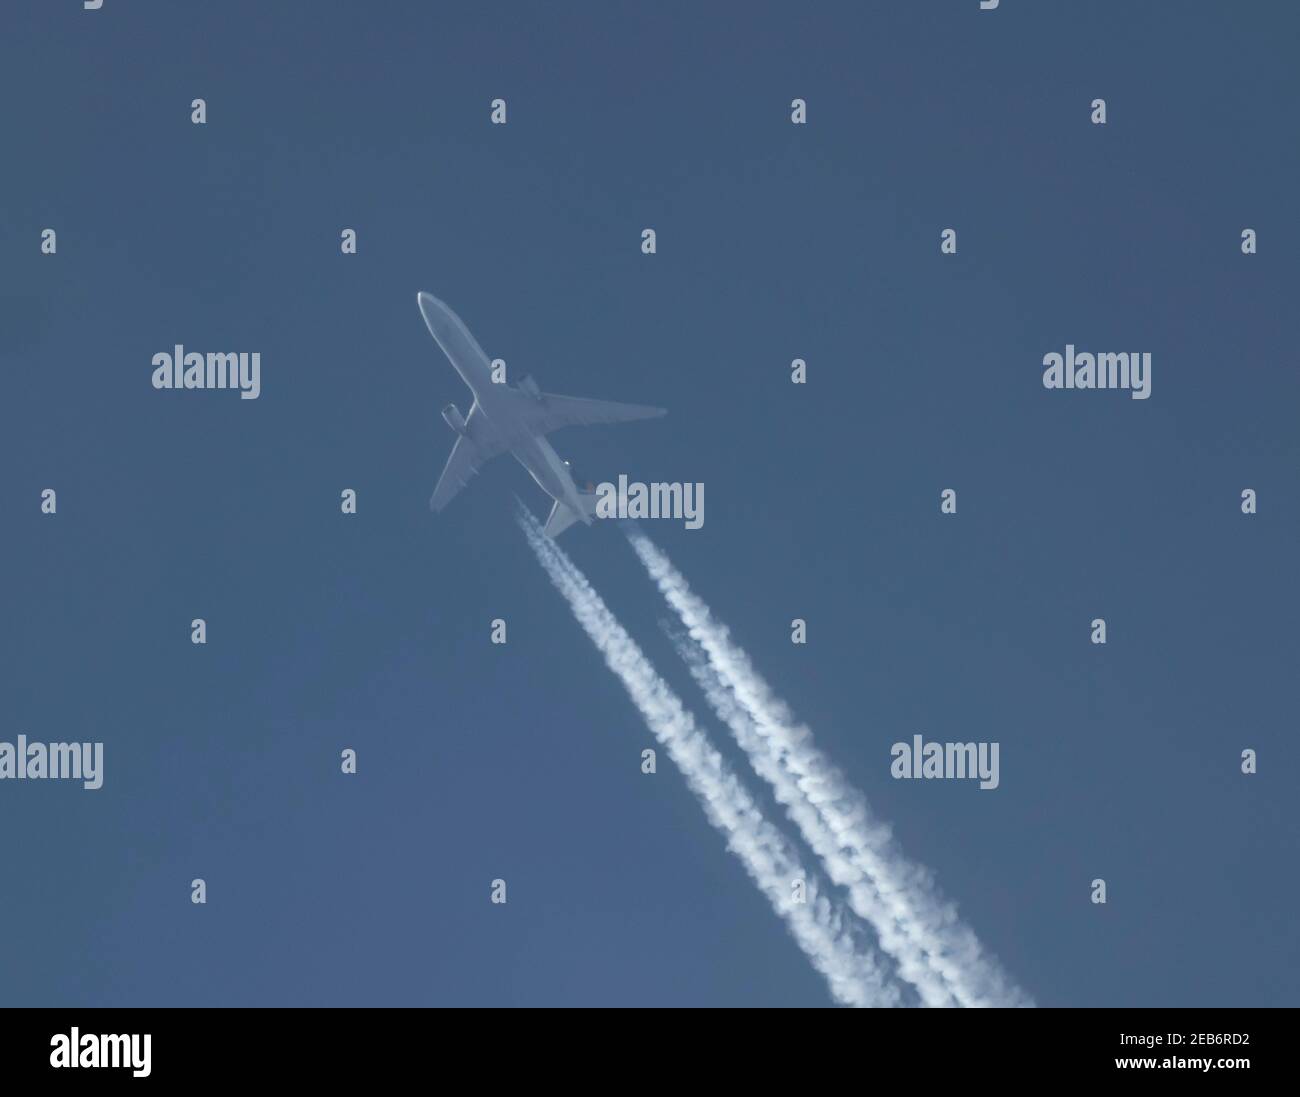 London, UK. 12 February 2021. Air traffic over London during the Covid-19 pandemic. Lufthansa Cargo McDonnell Douglas MD-11F flight from Chicago to Frankfurt at 34,900ft overflying London, UK. Credit: Malcolm Park/Alamy Stock Photo